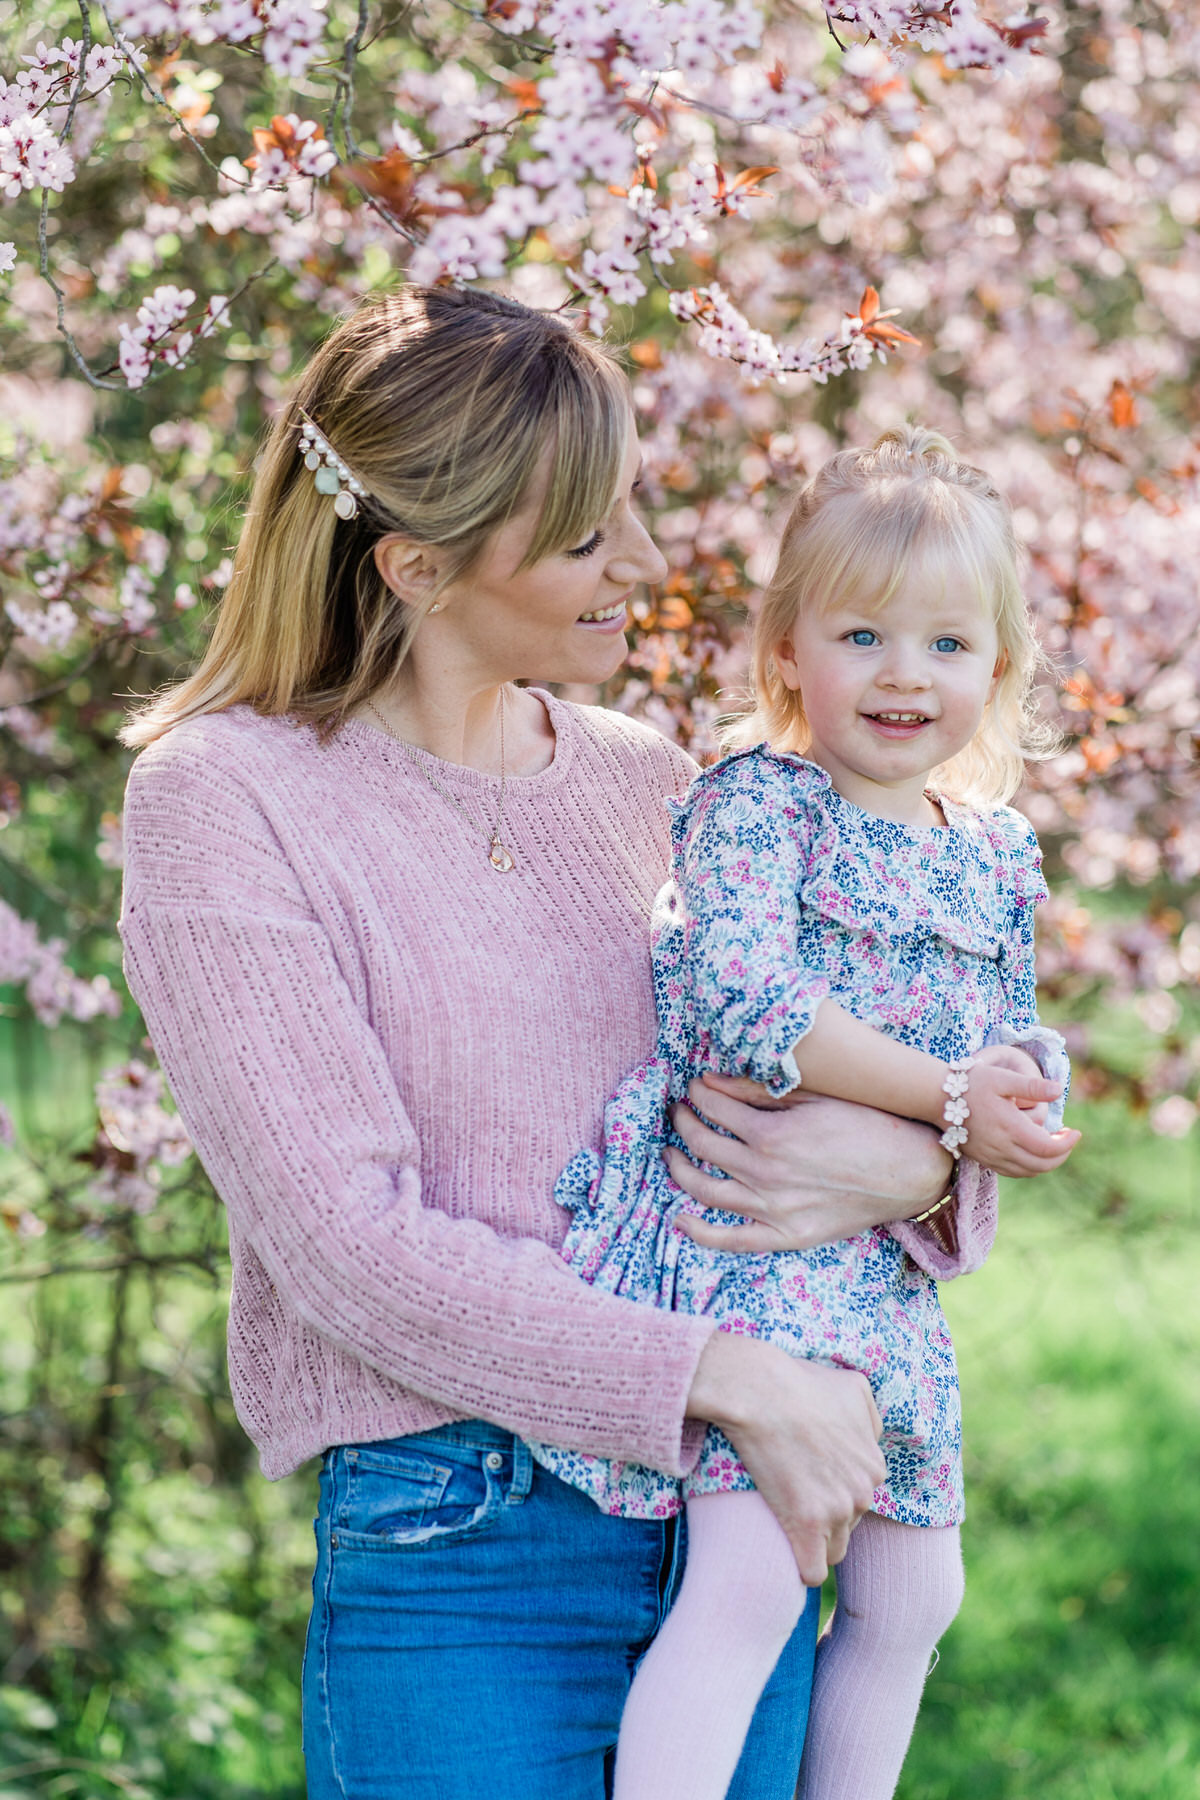 Mother and daughter photo in front of cherry blossom tree in Braintree, Essex.